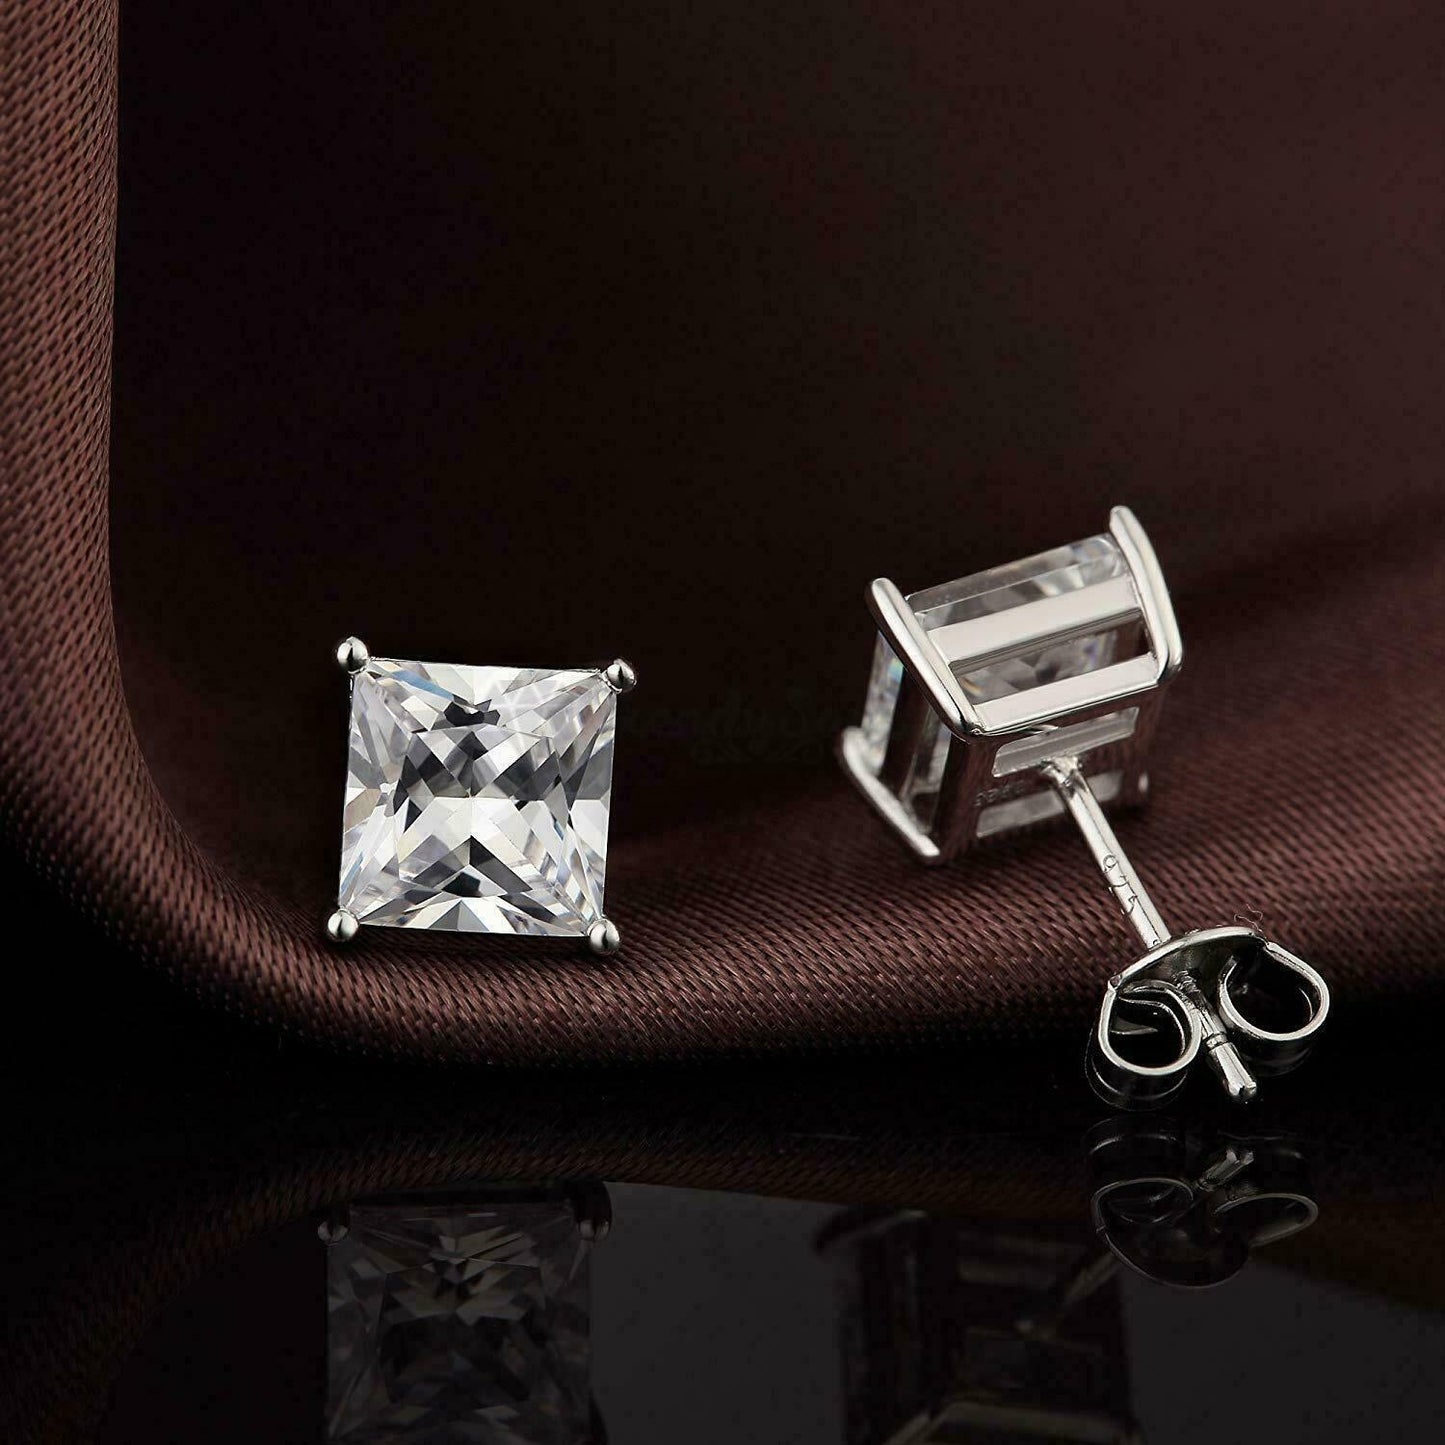 3MM Hypoallergenic Square Cut Cubic Zirconia Silver Small Stud Earrings Jewelry